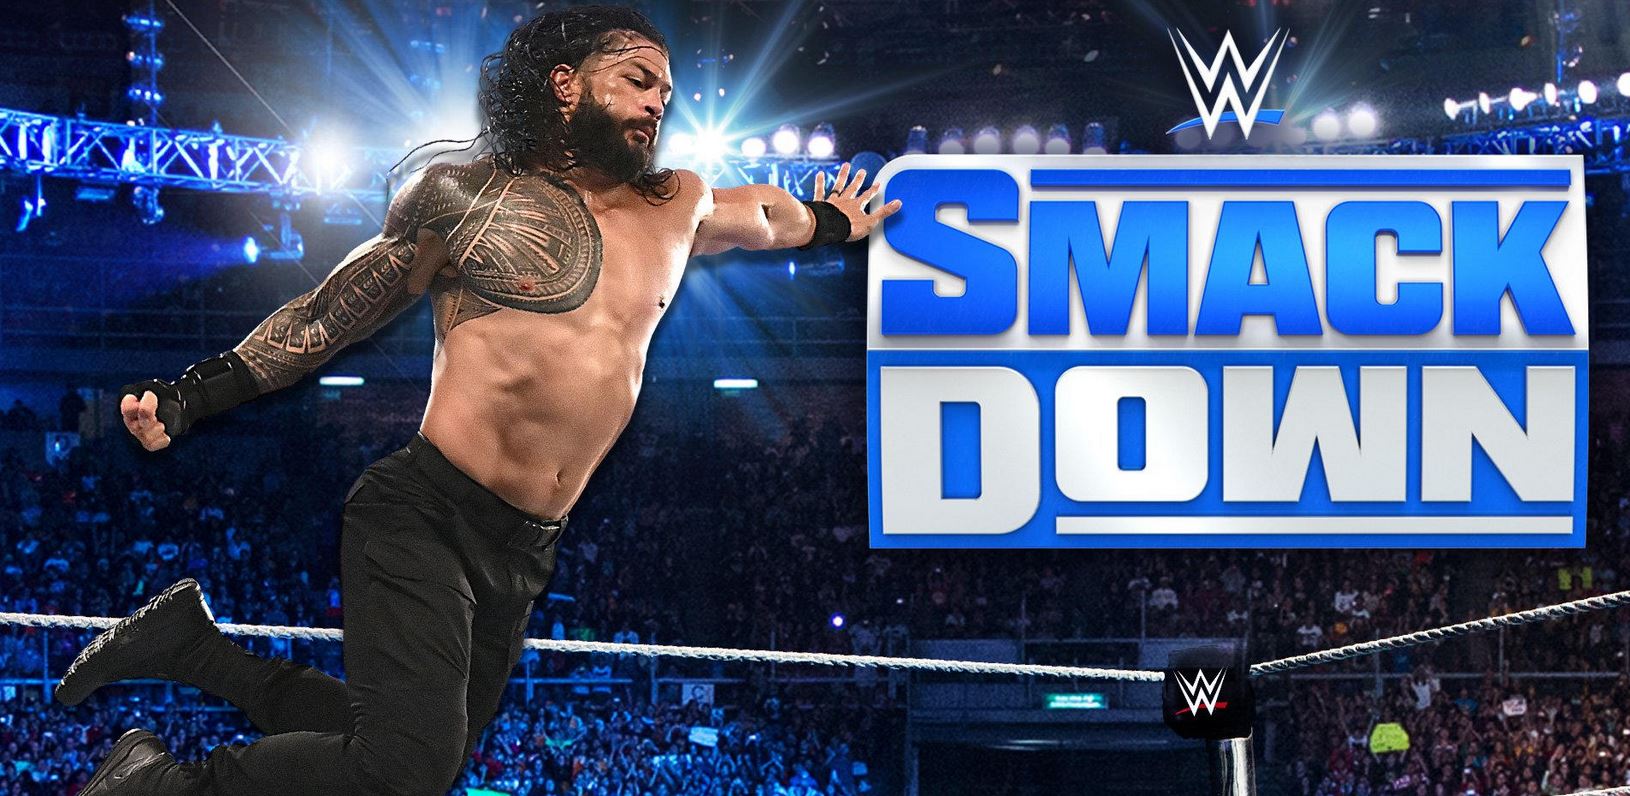 More Spoilers for Tonight's WWE SmackDown Episode.